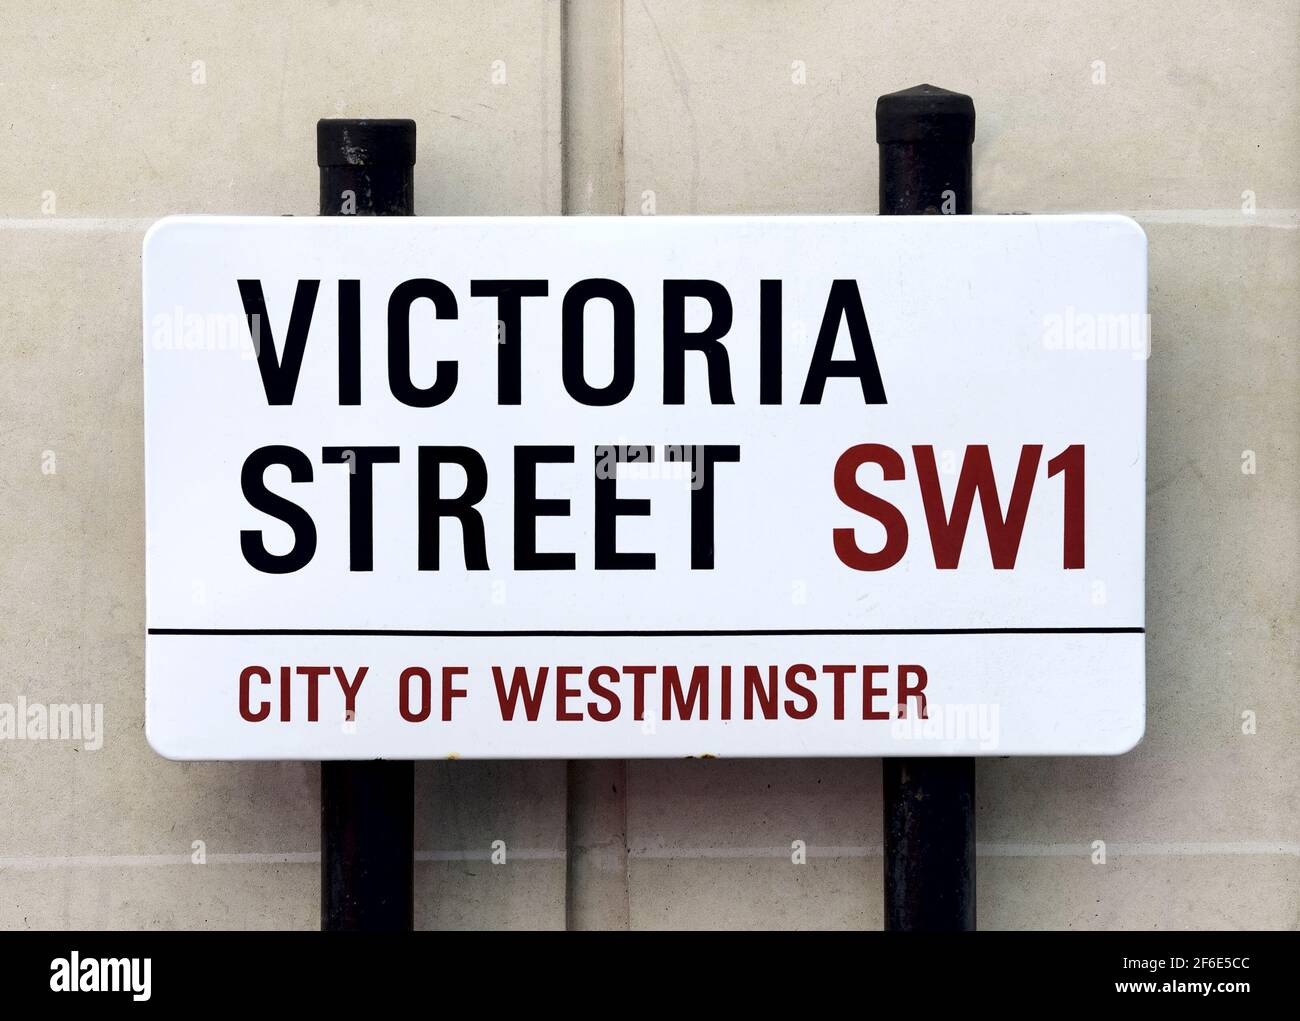 London, England, UK. Street sign: Victoria Street, SW1, City of Westminster Stock Photo